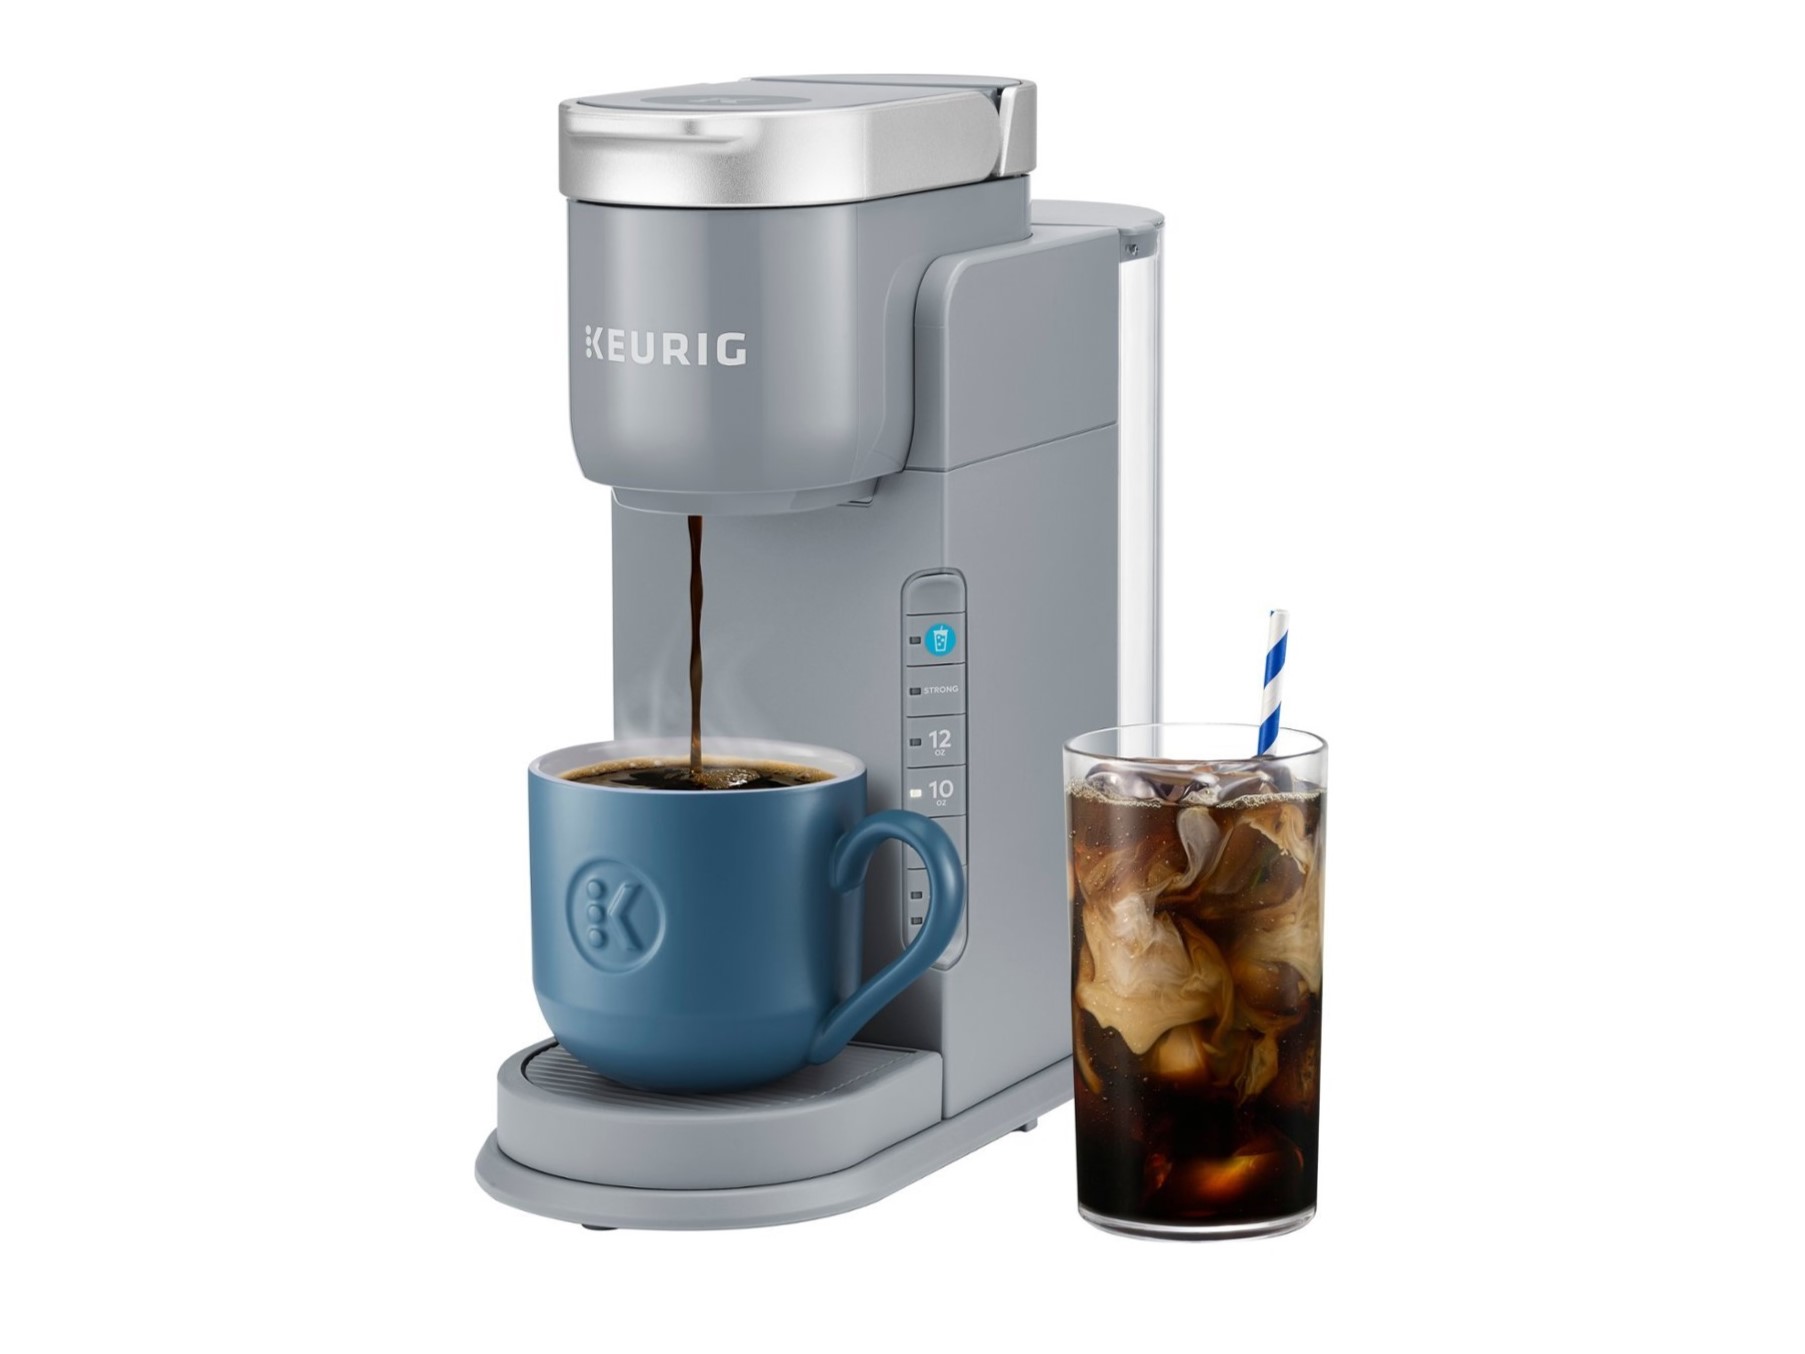 https://www.themanual.com/wp-content/uploads/sites/9/2023/08/Keurig-K-Iced-coffee-maker-with-hot-and-cold-coffee.jpg?p=1